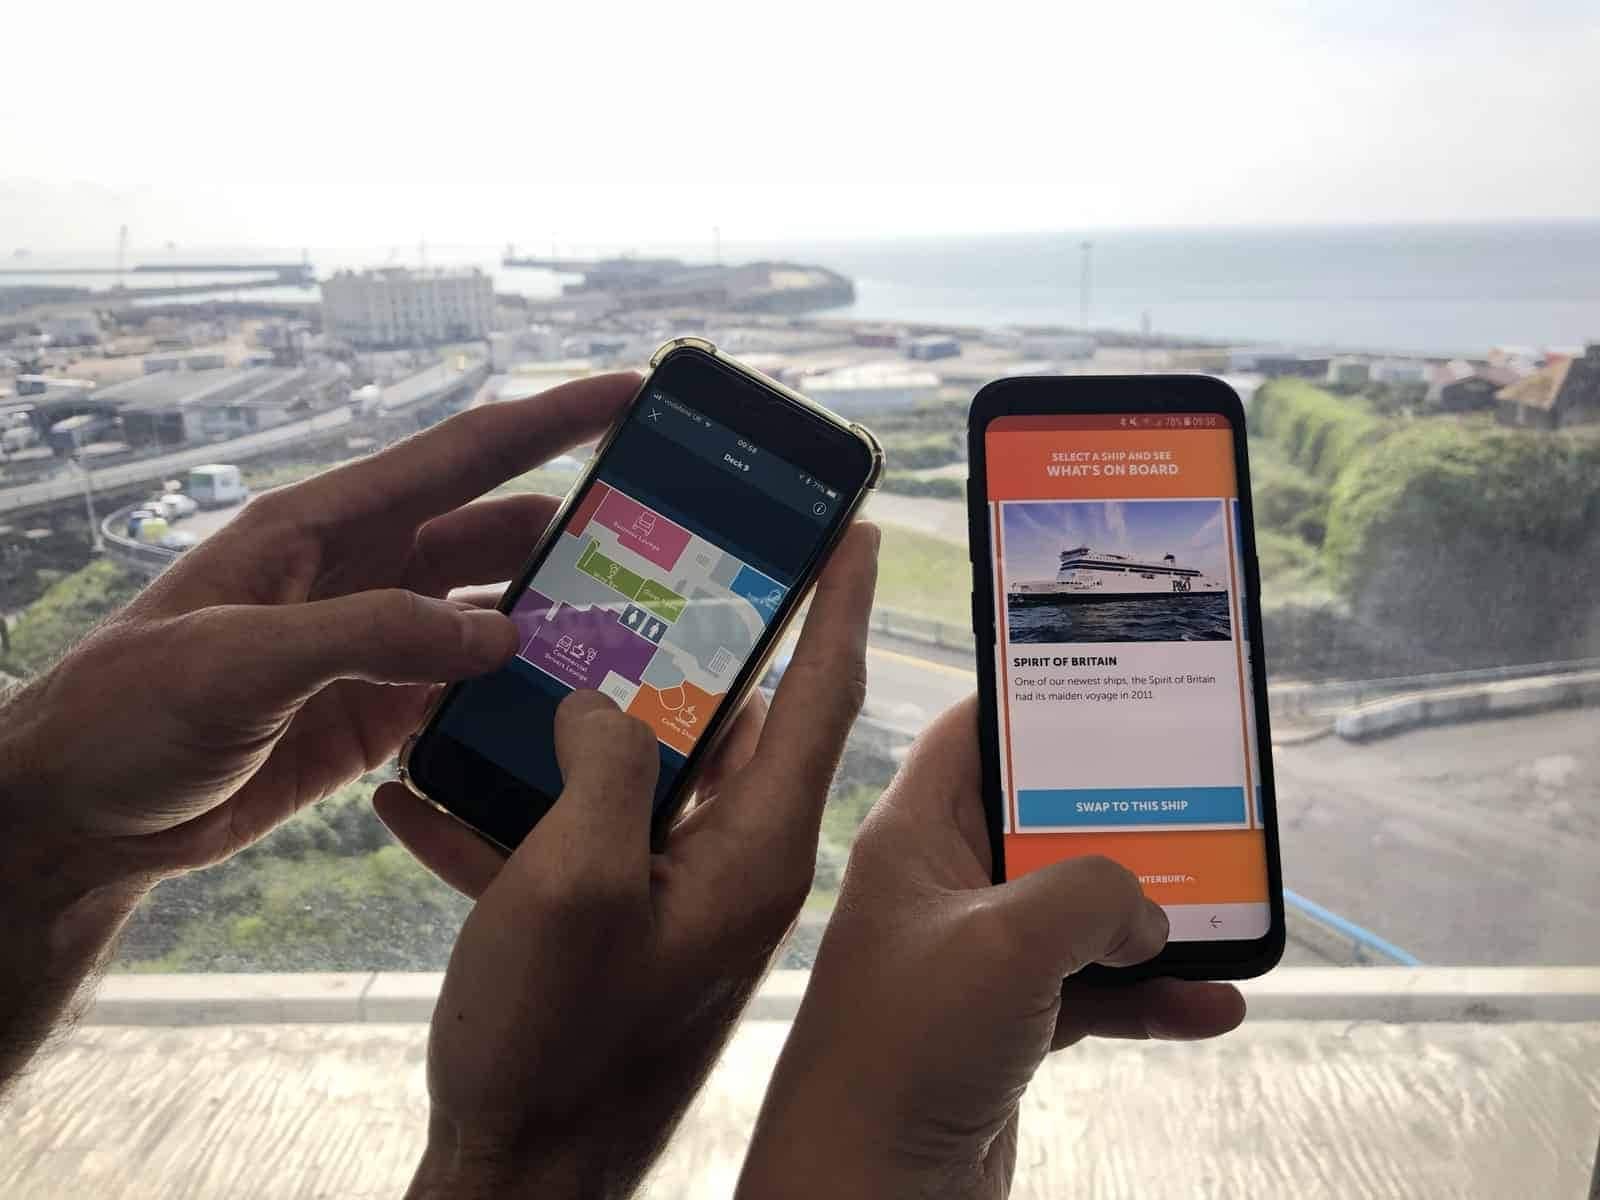 The P&O Ferries mobile app - which will be rolled out across the company's fleet of passenger ships including on its Larne-Cairnryan route, the English Channel and the North Sea - will mean that customers no longer have to use any paper for their tickets.